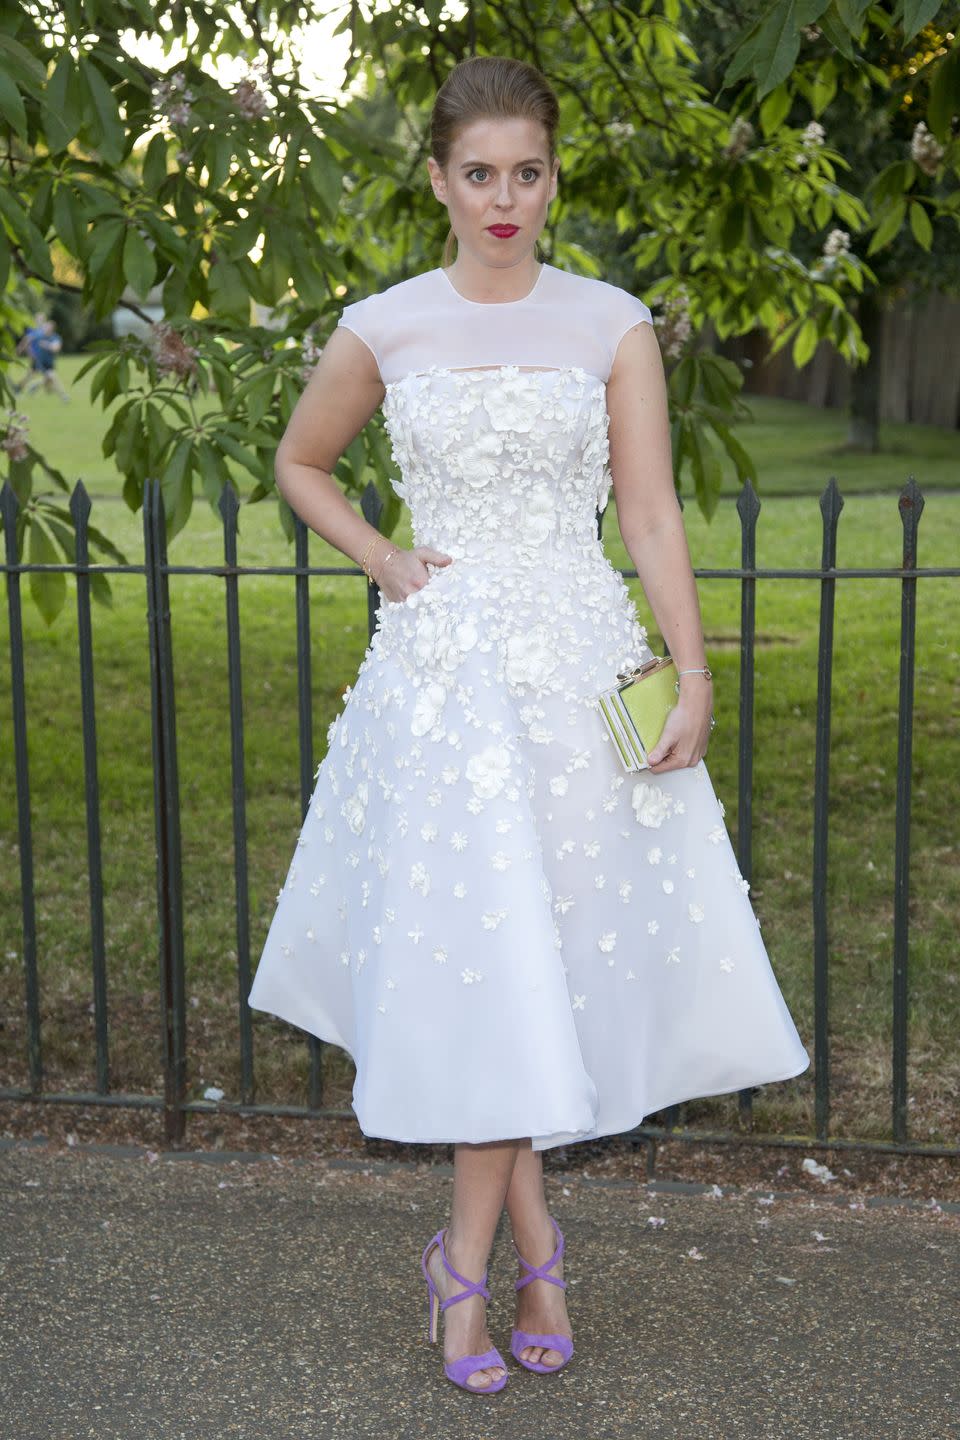 <p>The young royal stepped out in this floral embellished dress paired with lilac heels to the Serpentine Galley Summer Party.</p>